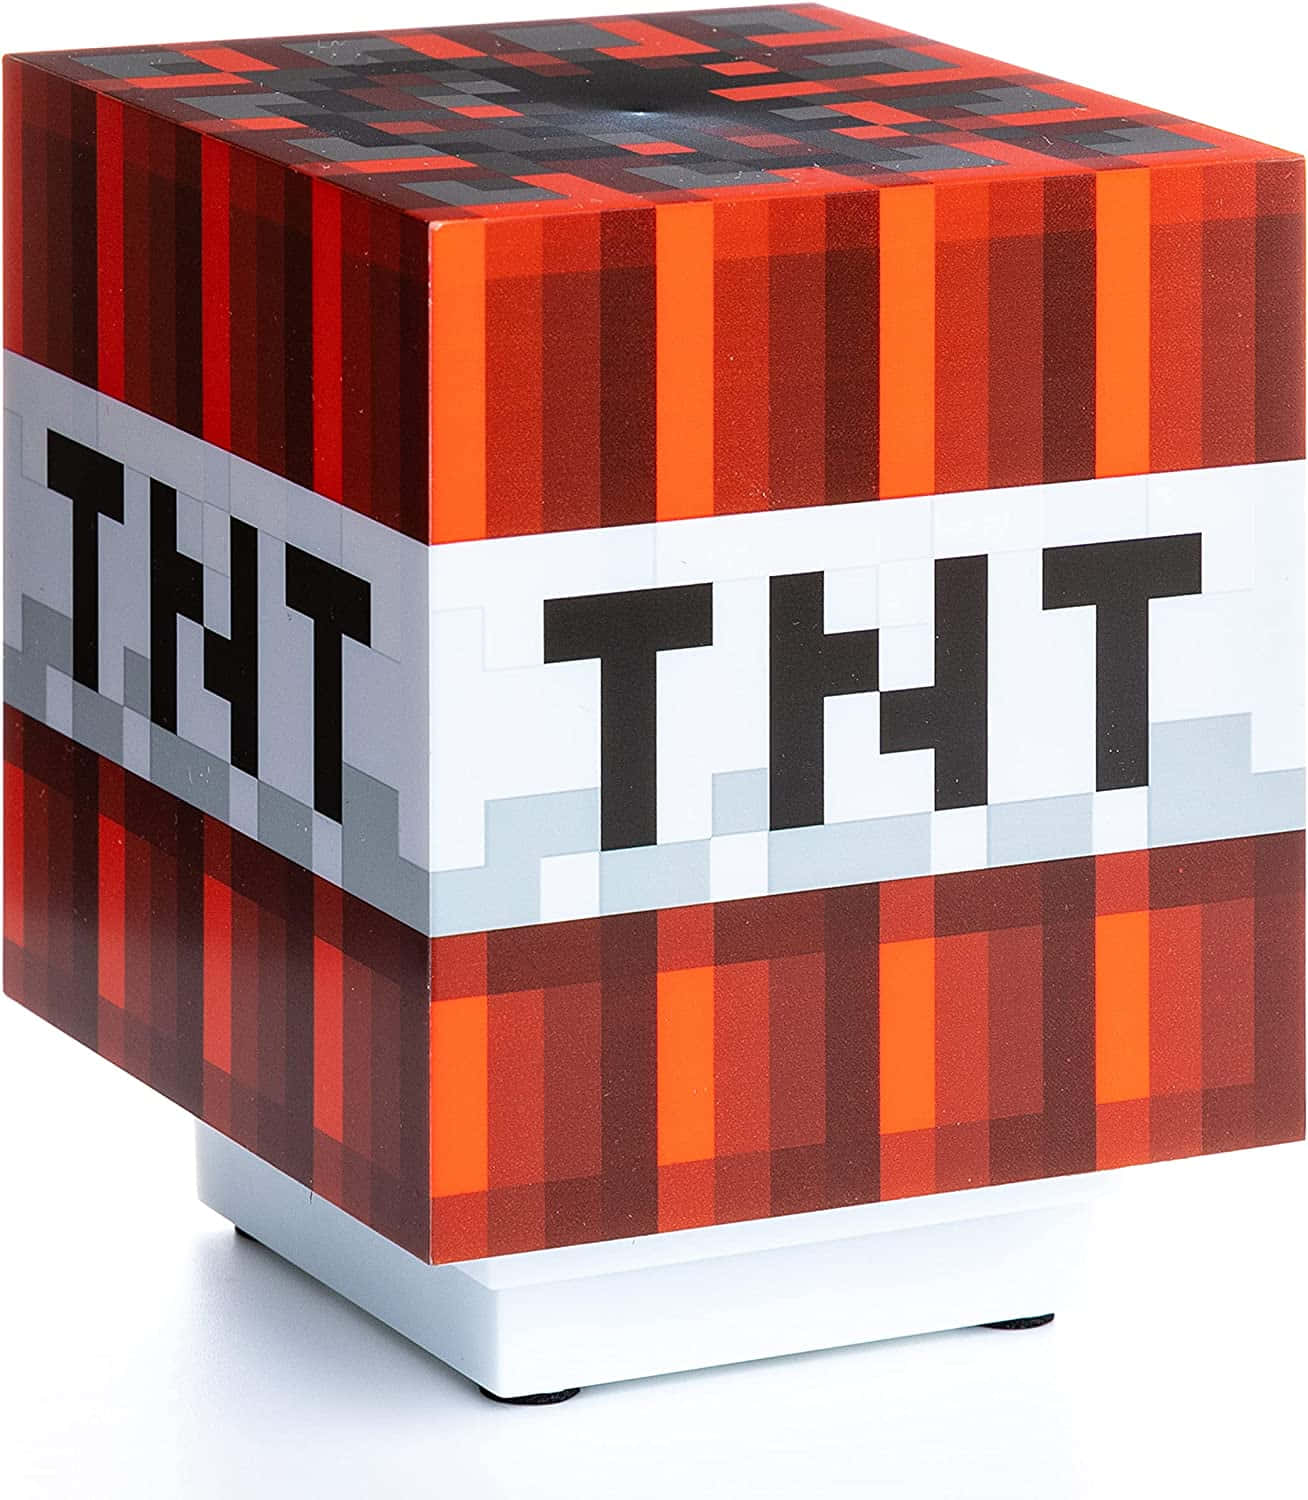 An exciting view of Minecraft TNT. Wallpaper